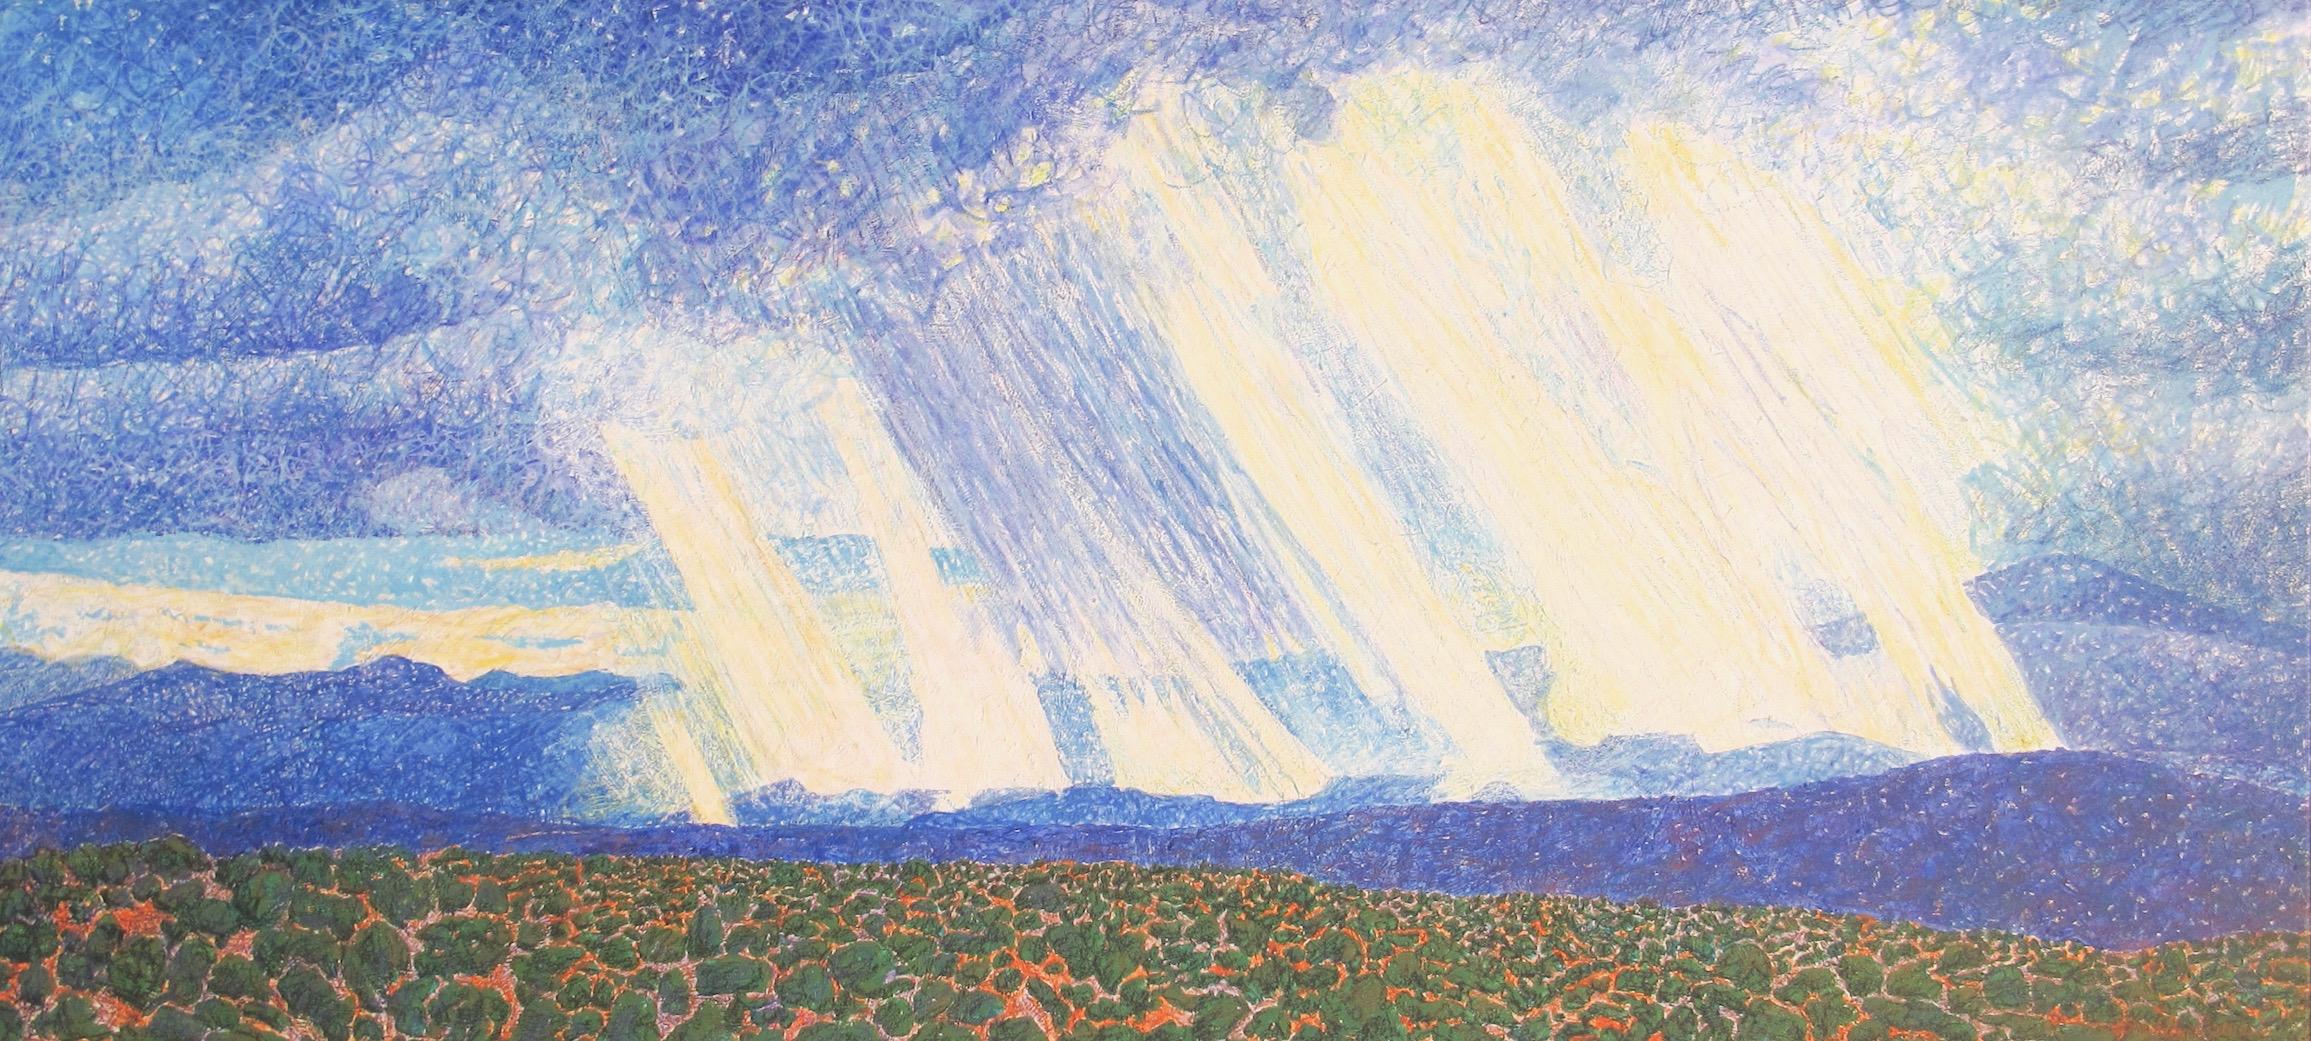 Rain and Sun-View From Studio, John Hogan New Mexico landscape painting mountain 1